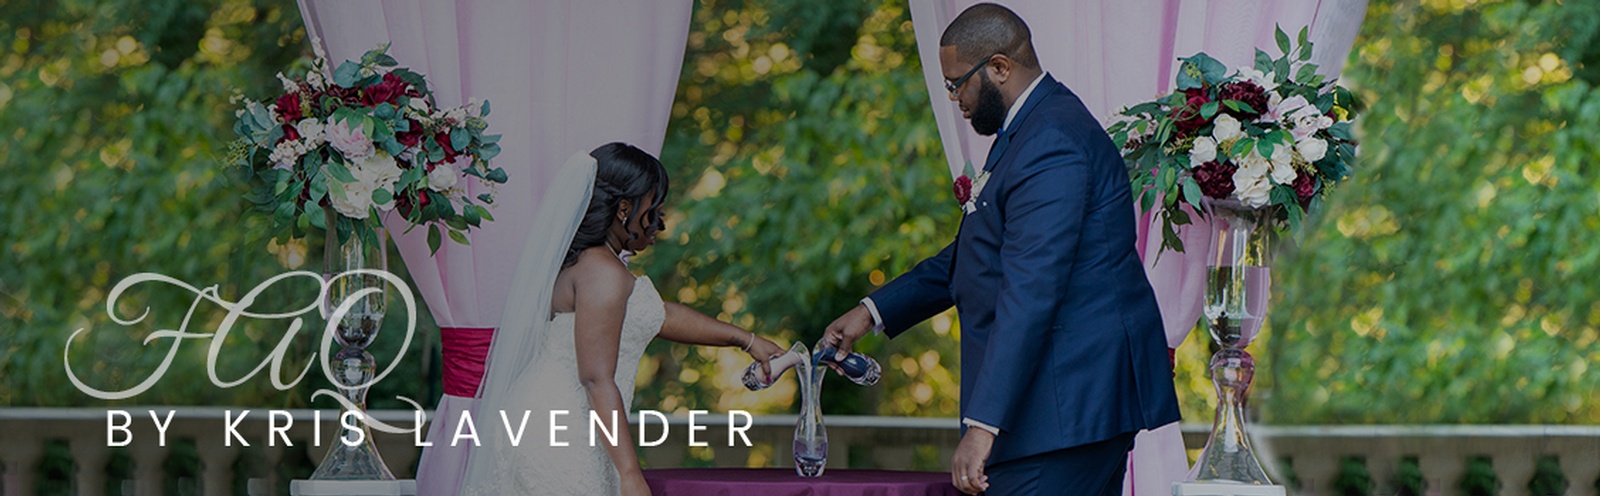 Frequently Asked Questions - Kris Lavender - Best Wedding Planner in Atlanta